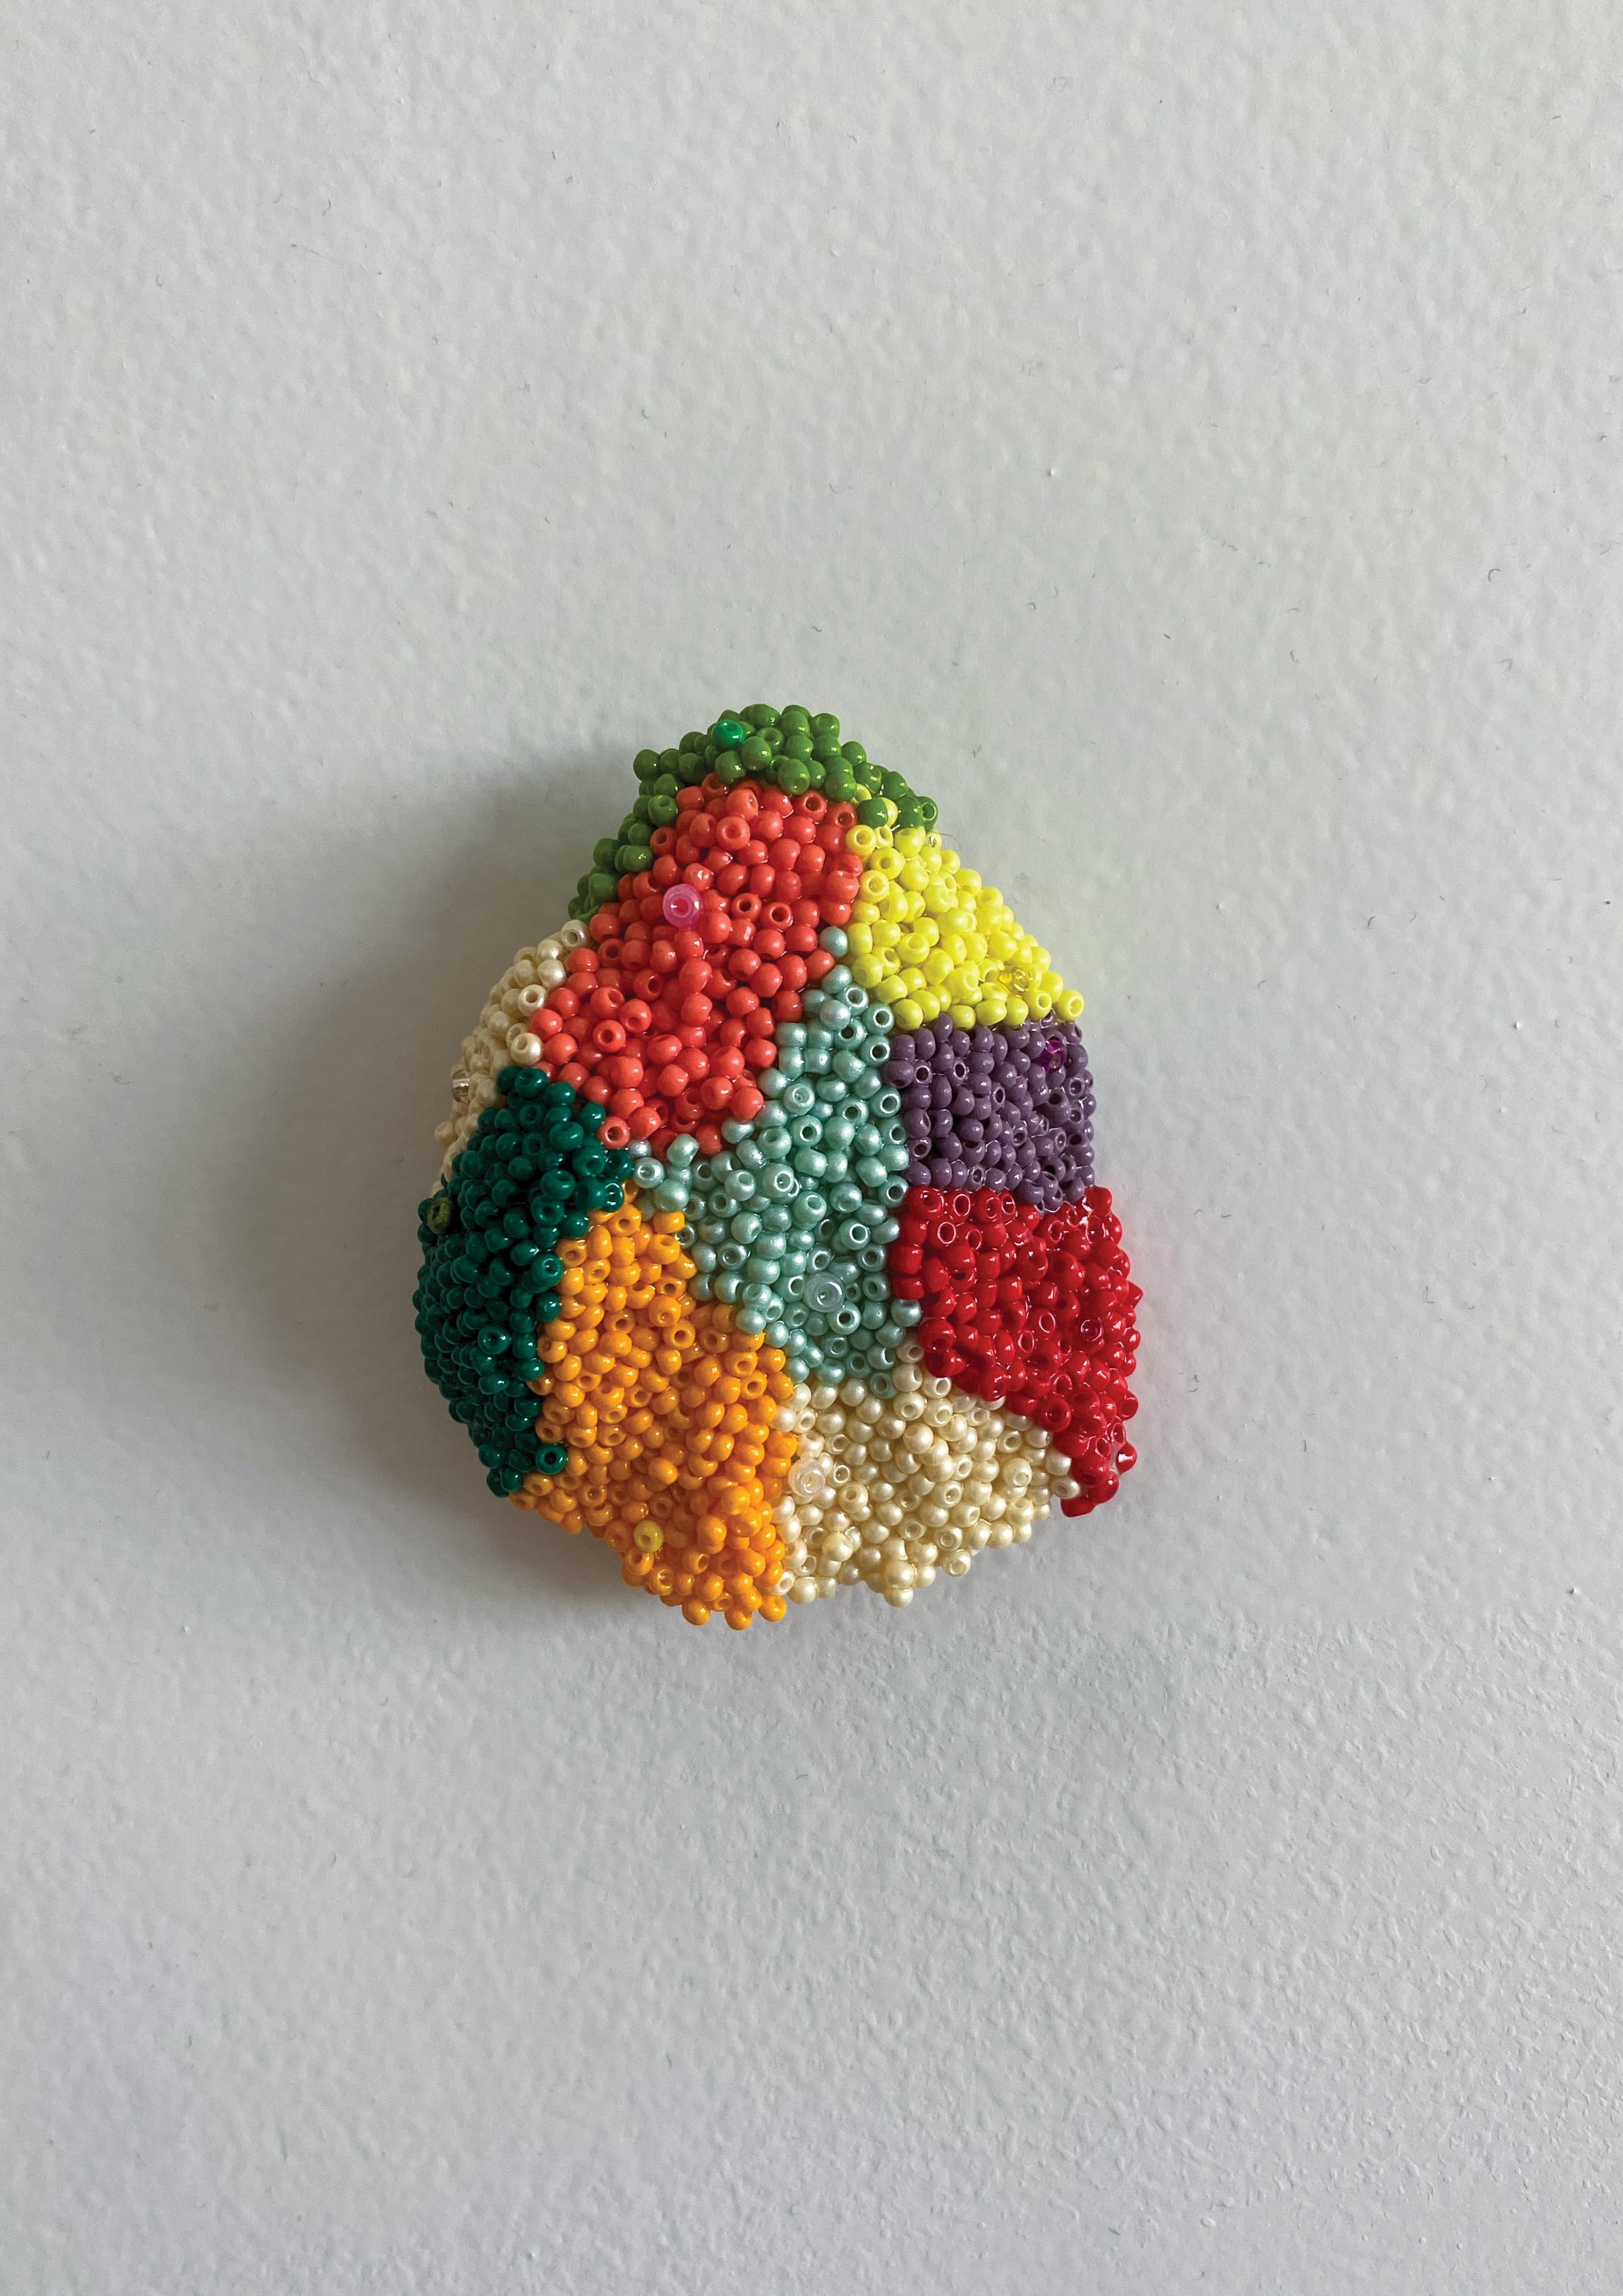 Tio, 2022, glass beads on oyster shell